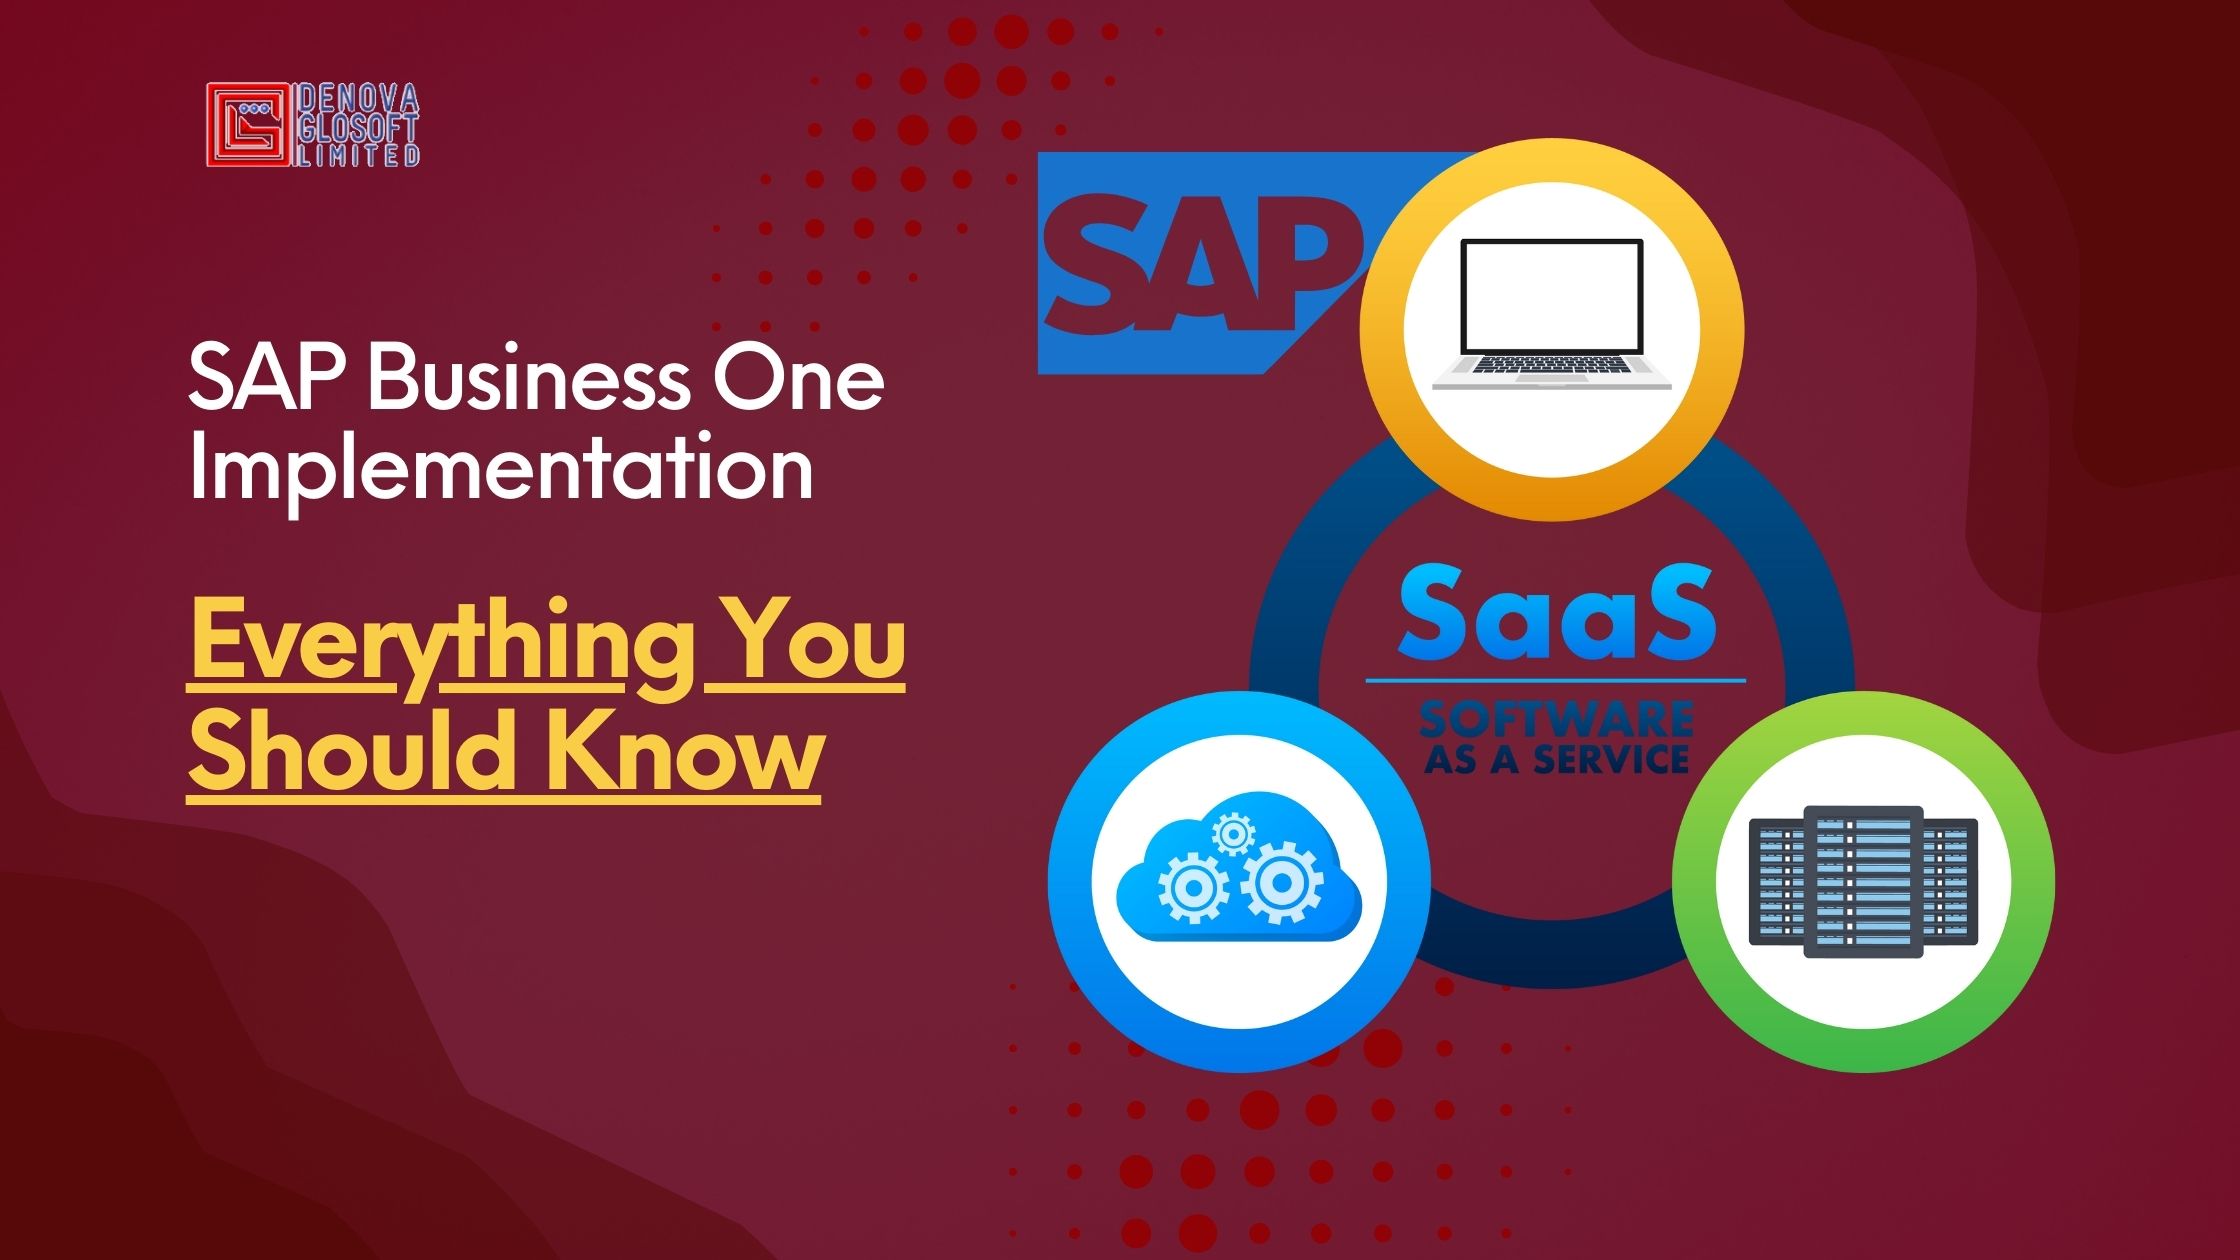 SAP Business One Implemention | ERP Software For Small Business